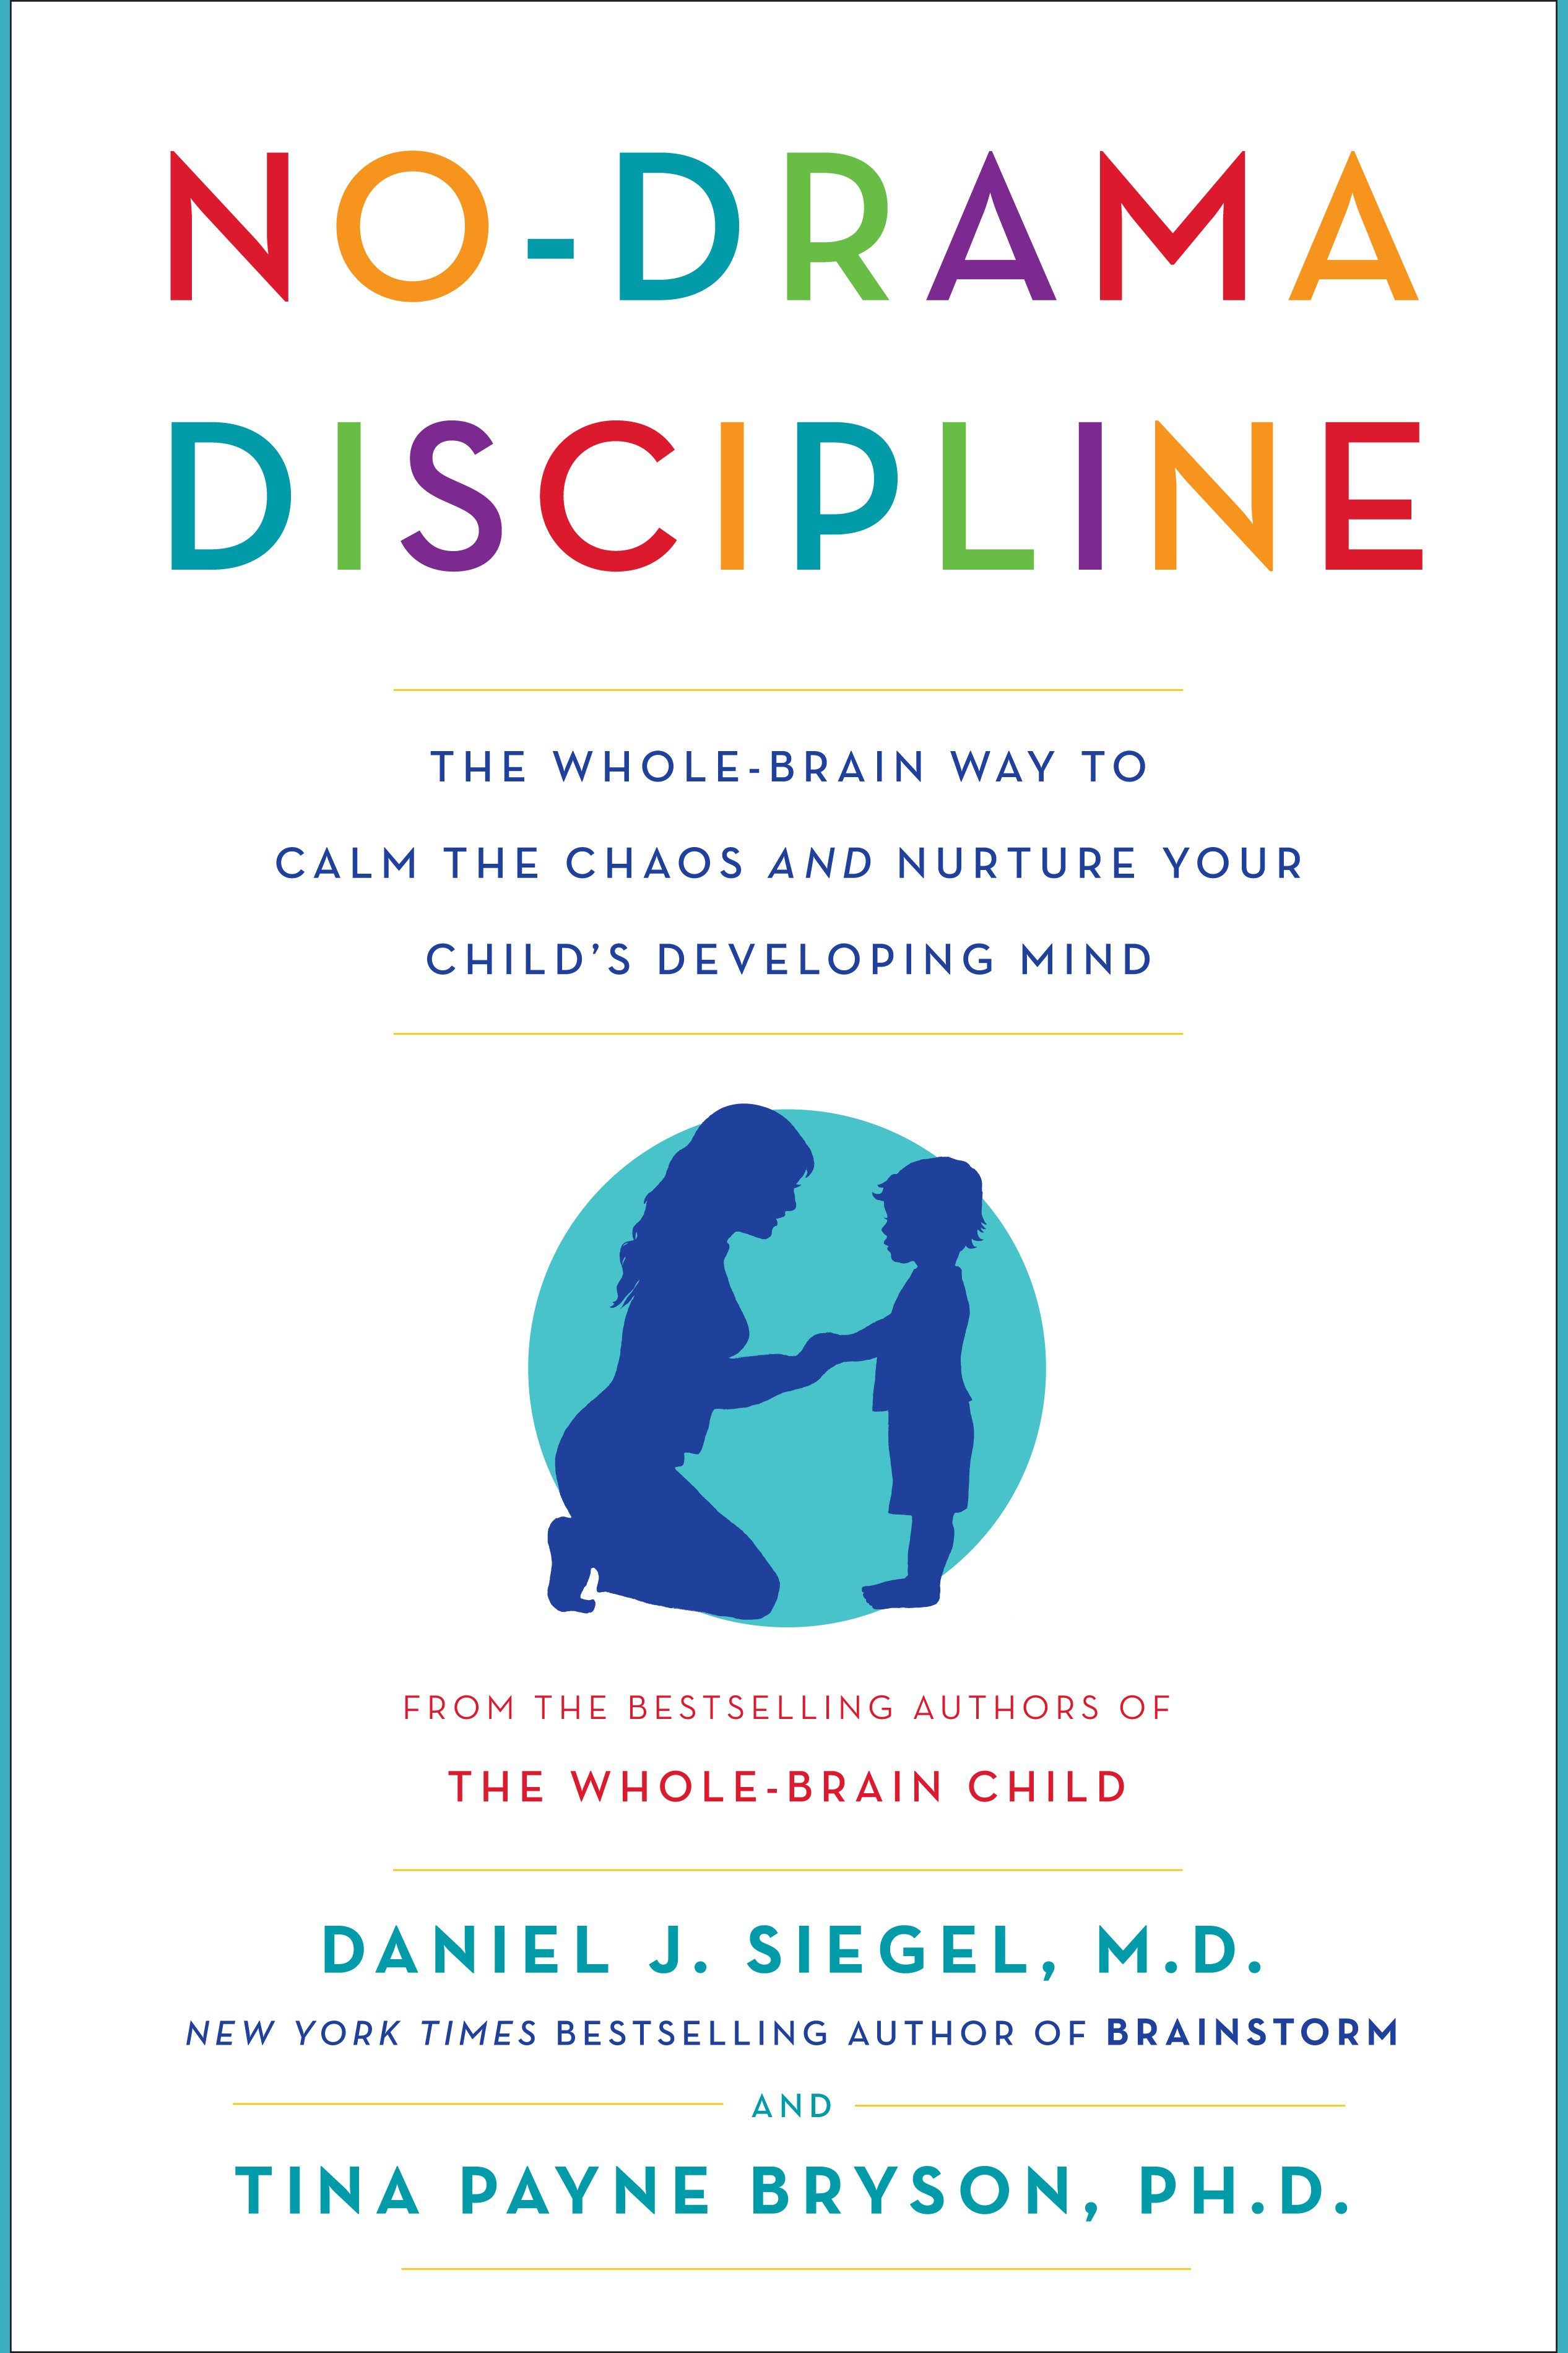 No-drama discipline the whole-brain way to calm the chaos and nurture your child's developing mind cover image